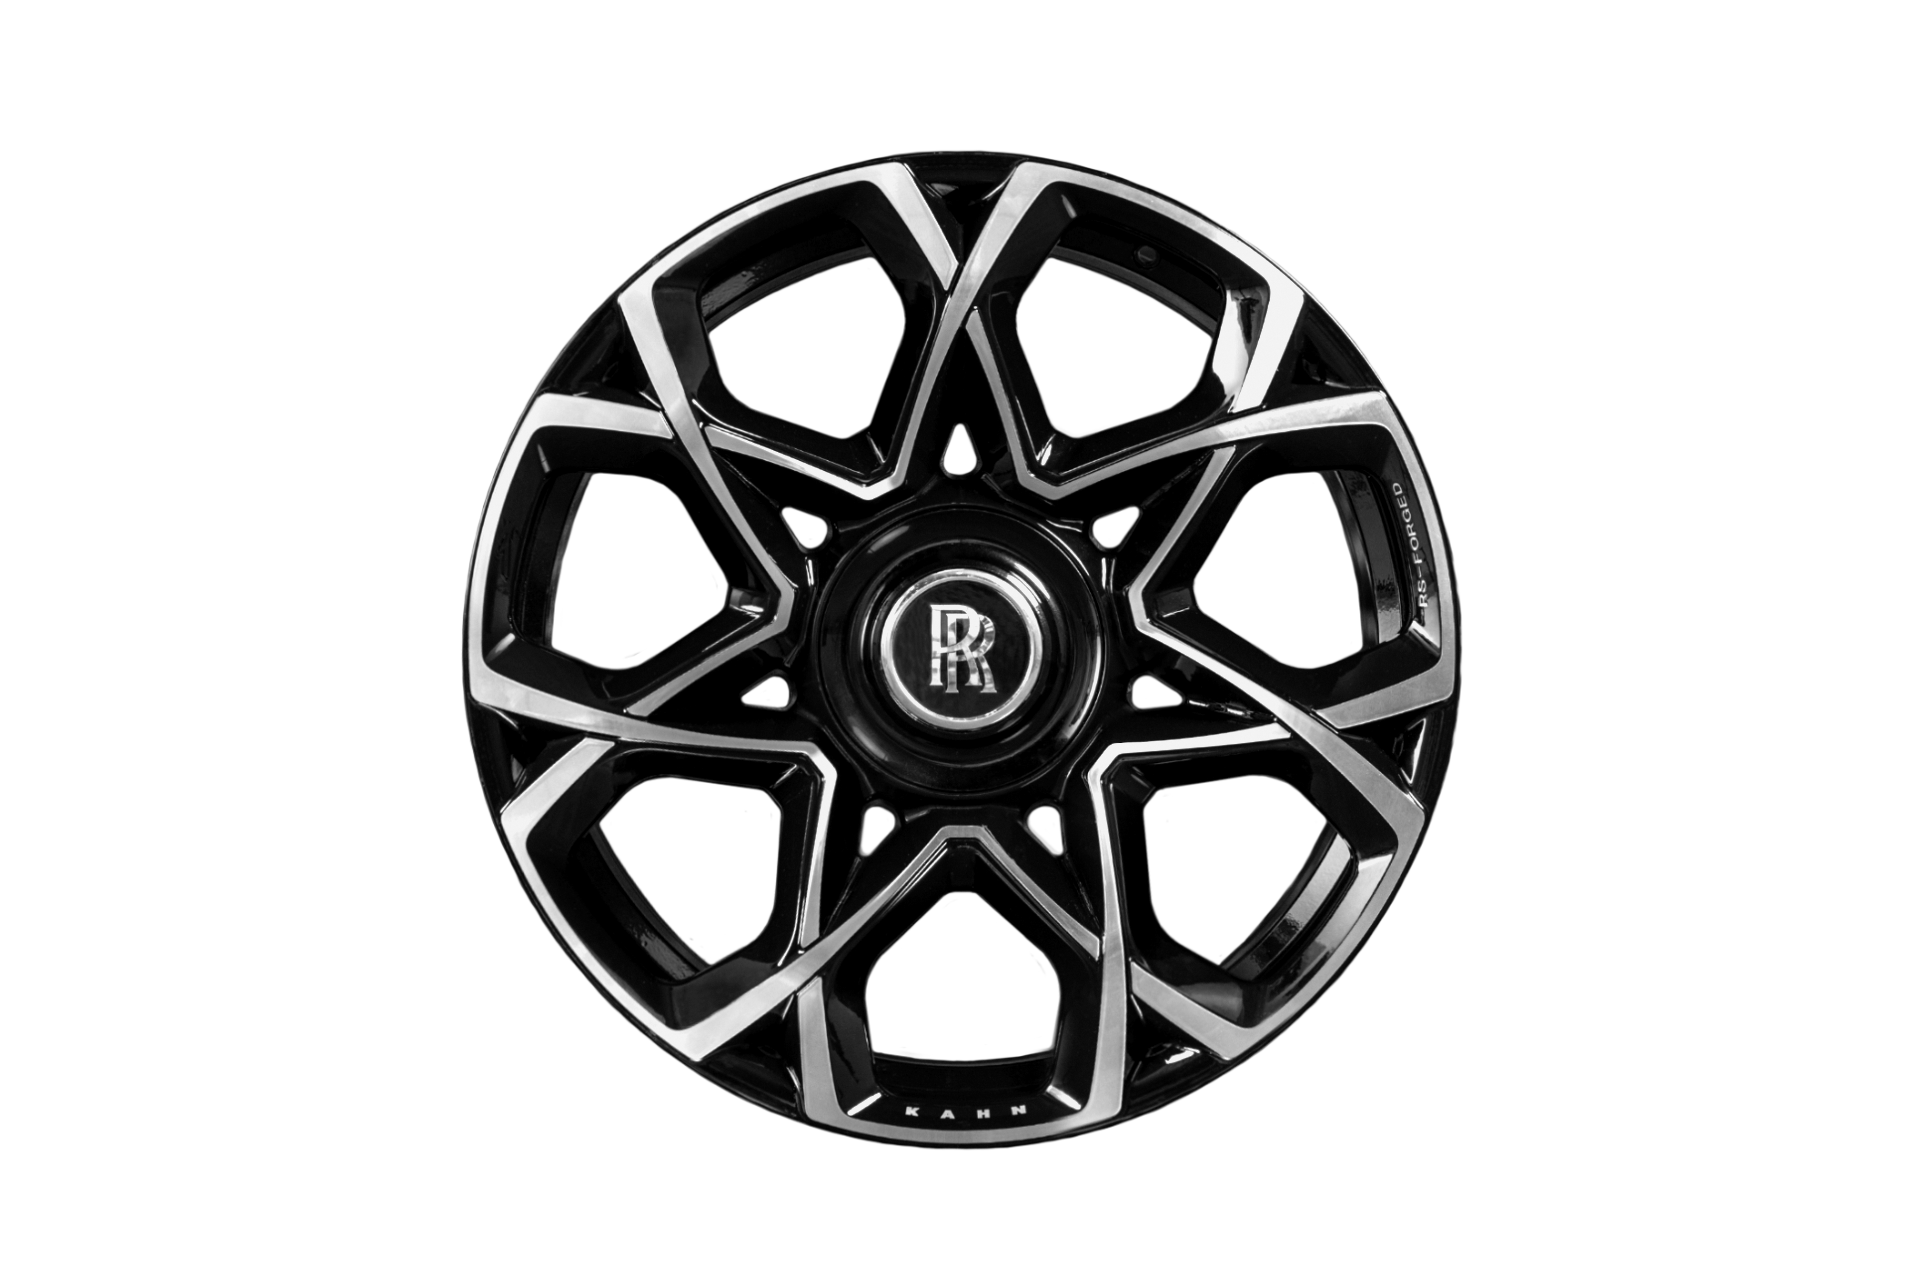 Type 55 RS-Forged Lightweight Alloy Wheels Suitable For Rolls Royce Phantom (2017-PRESENT)